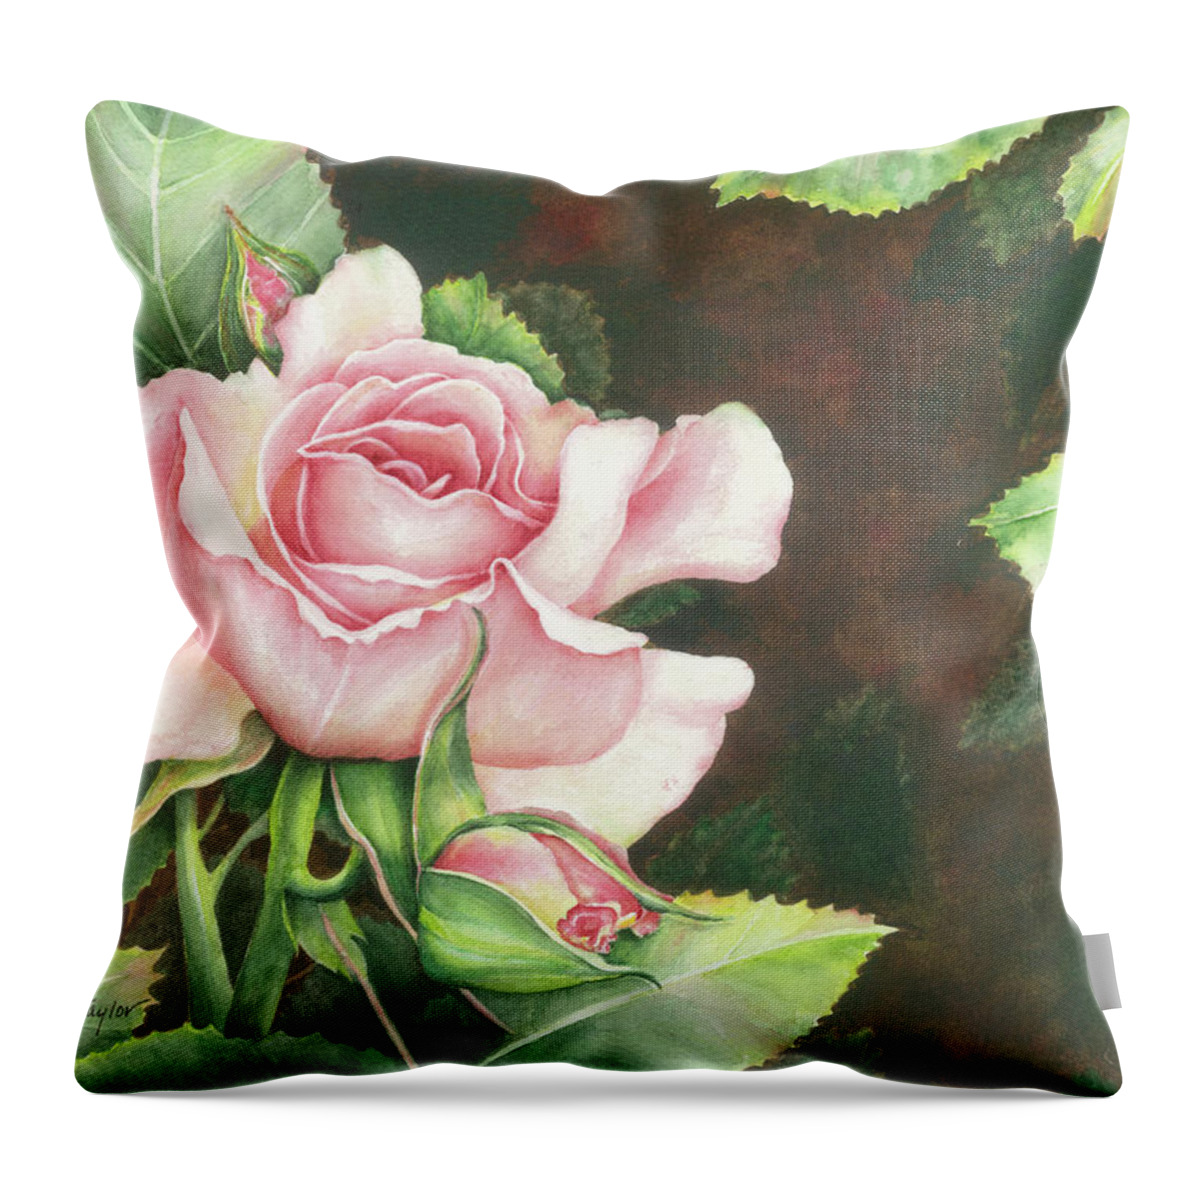 Rose Throw Pillow featuring the painting Grace by Lori Taylor